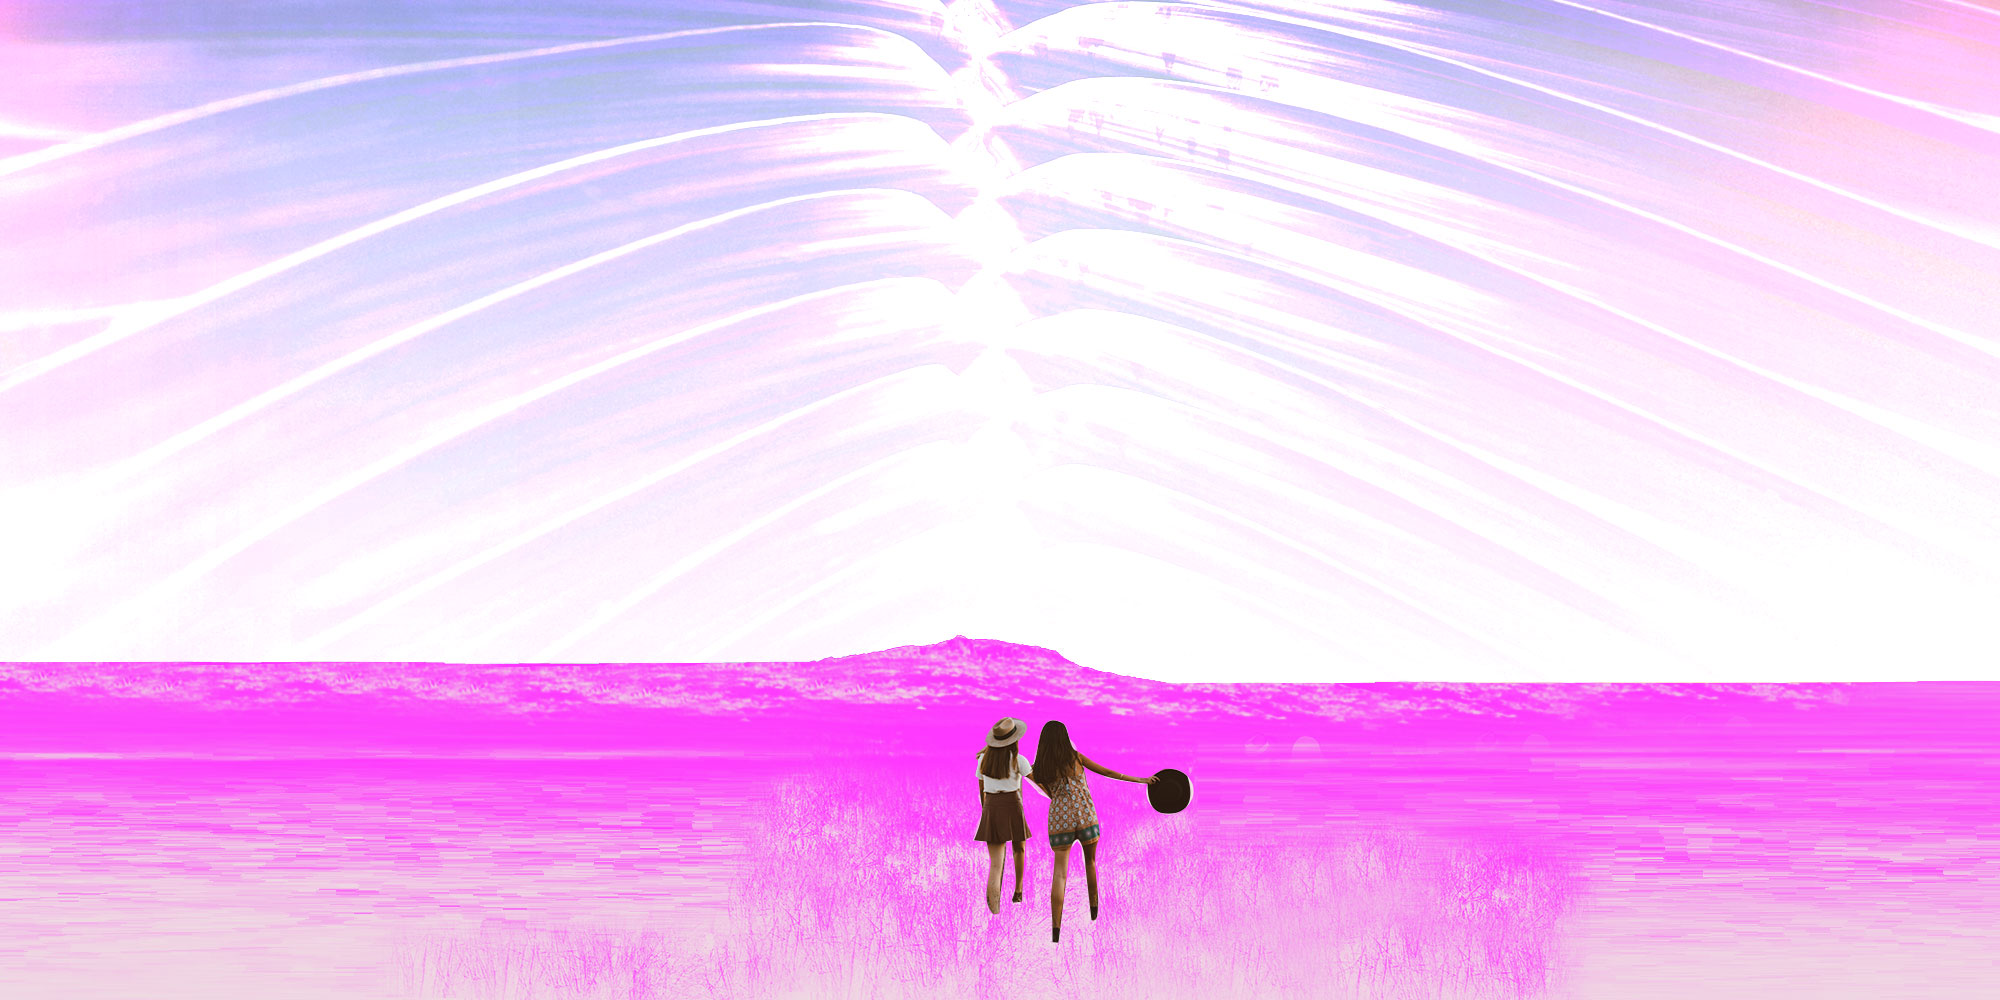 two girls in a big open field holding hands walking towards some unknown